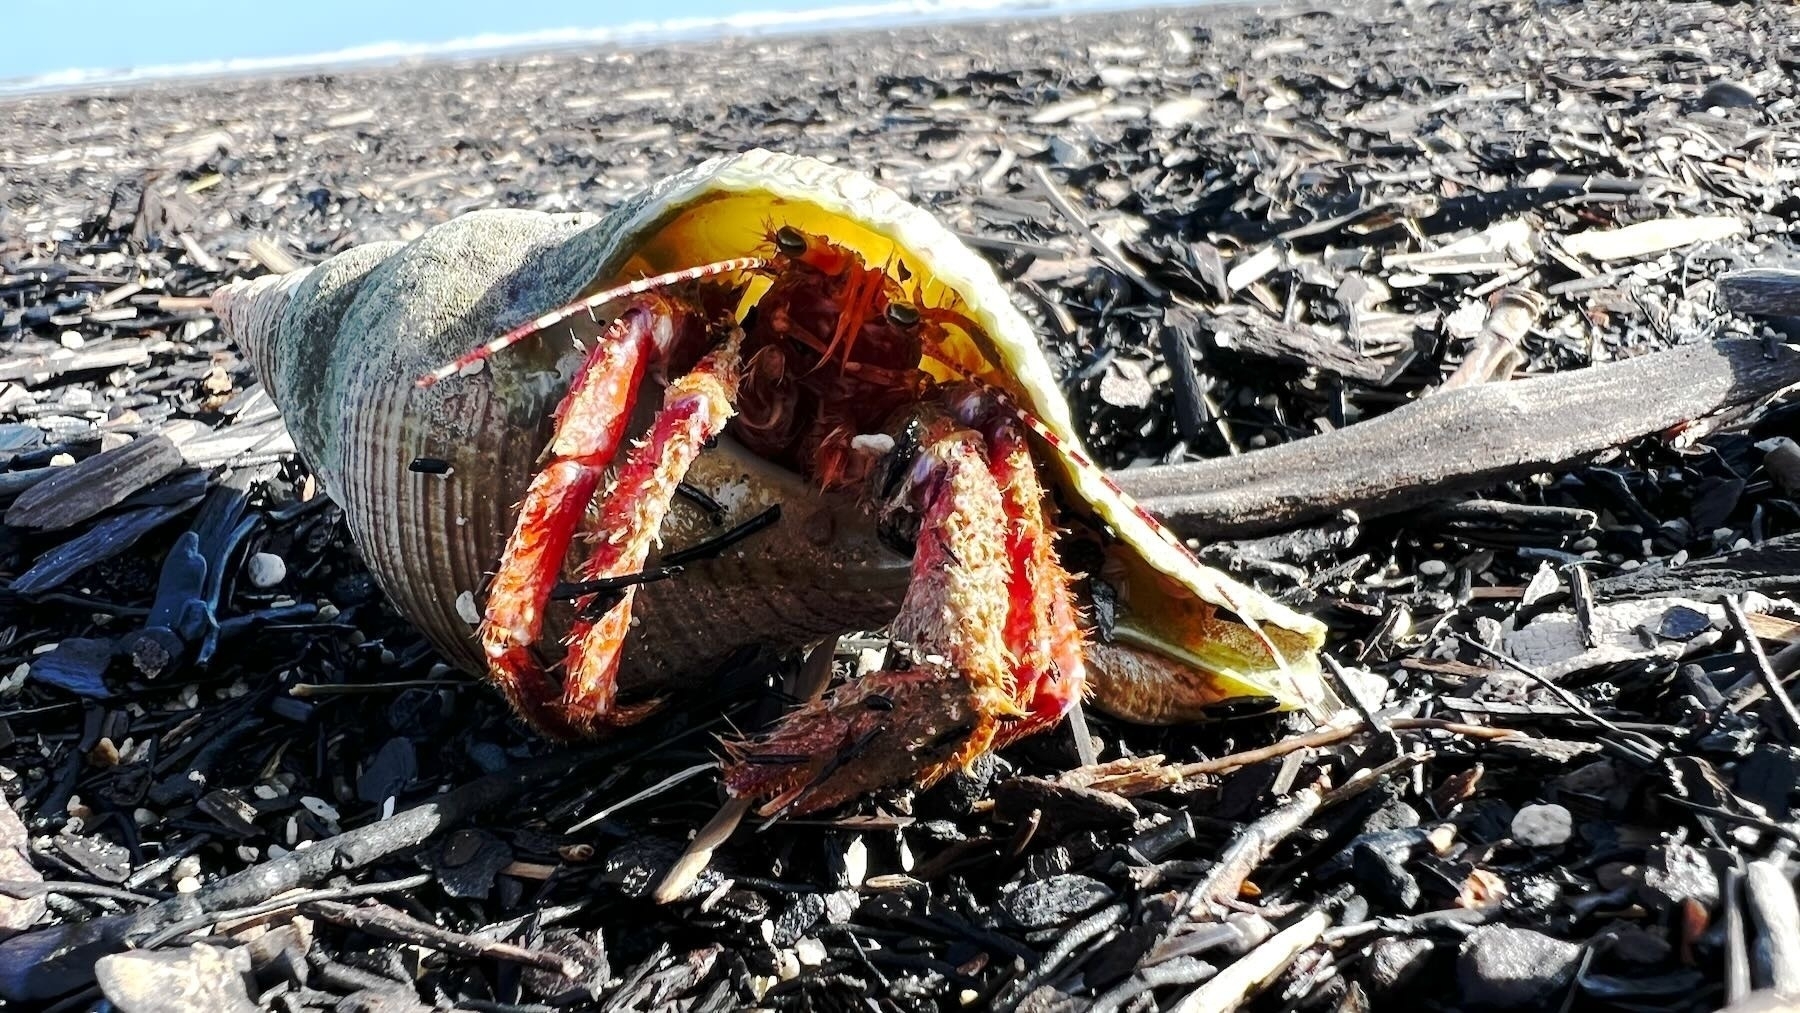 Hermit crab in large shell.